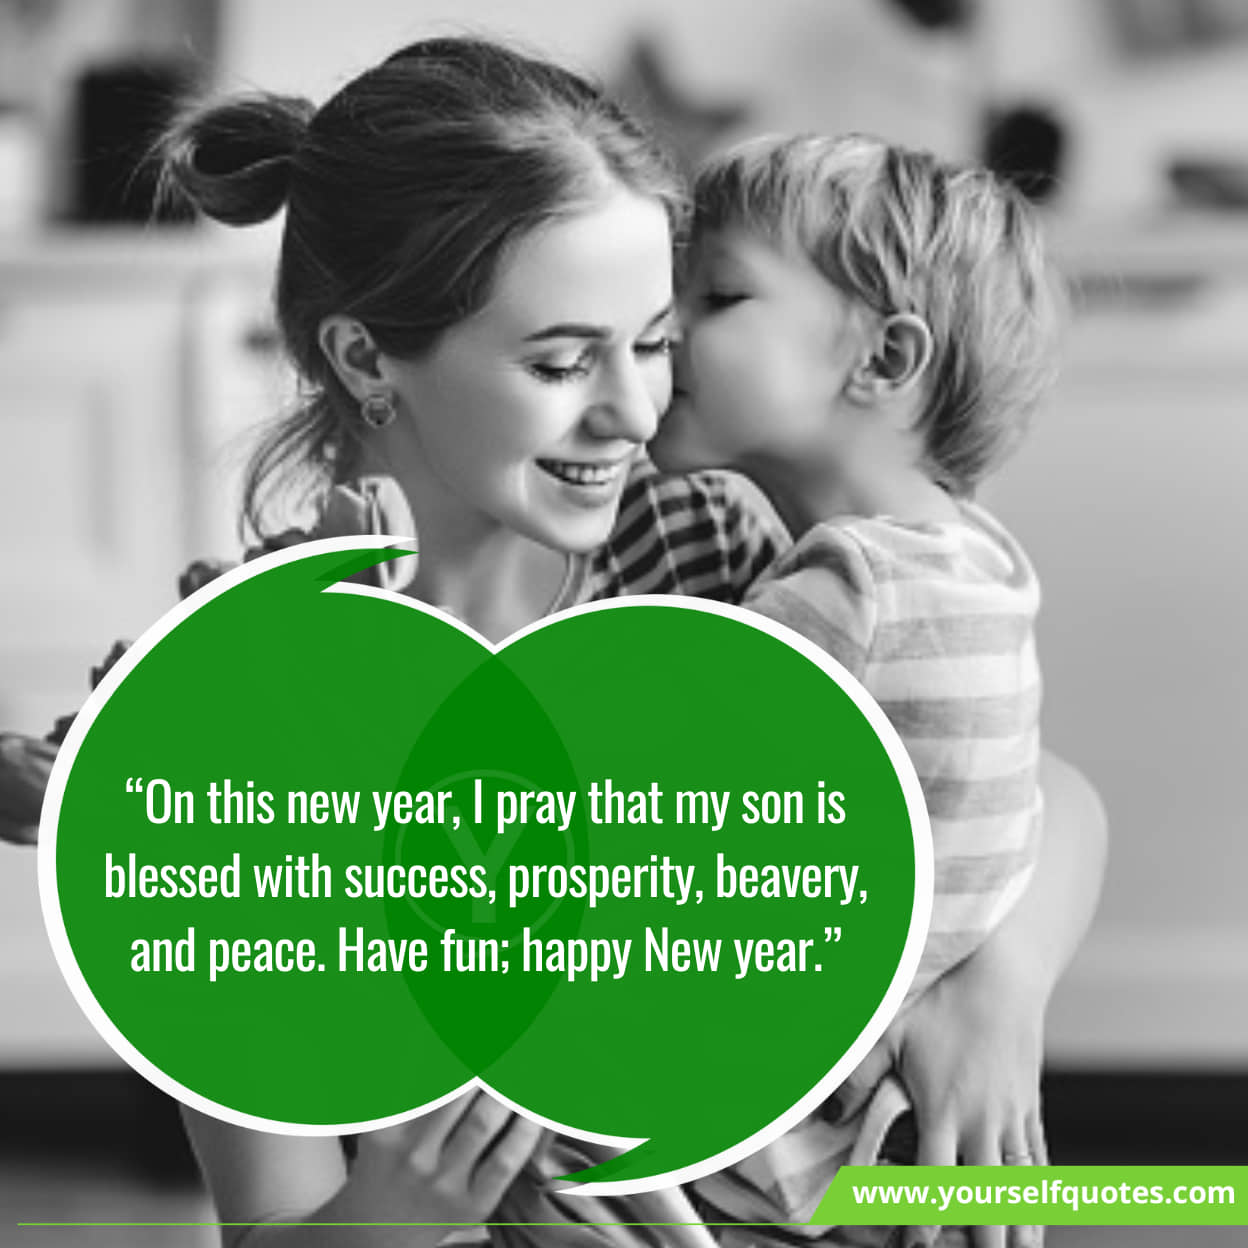 Latest Inspiring Happy New Year Graceful Wishes for Son